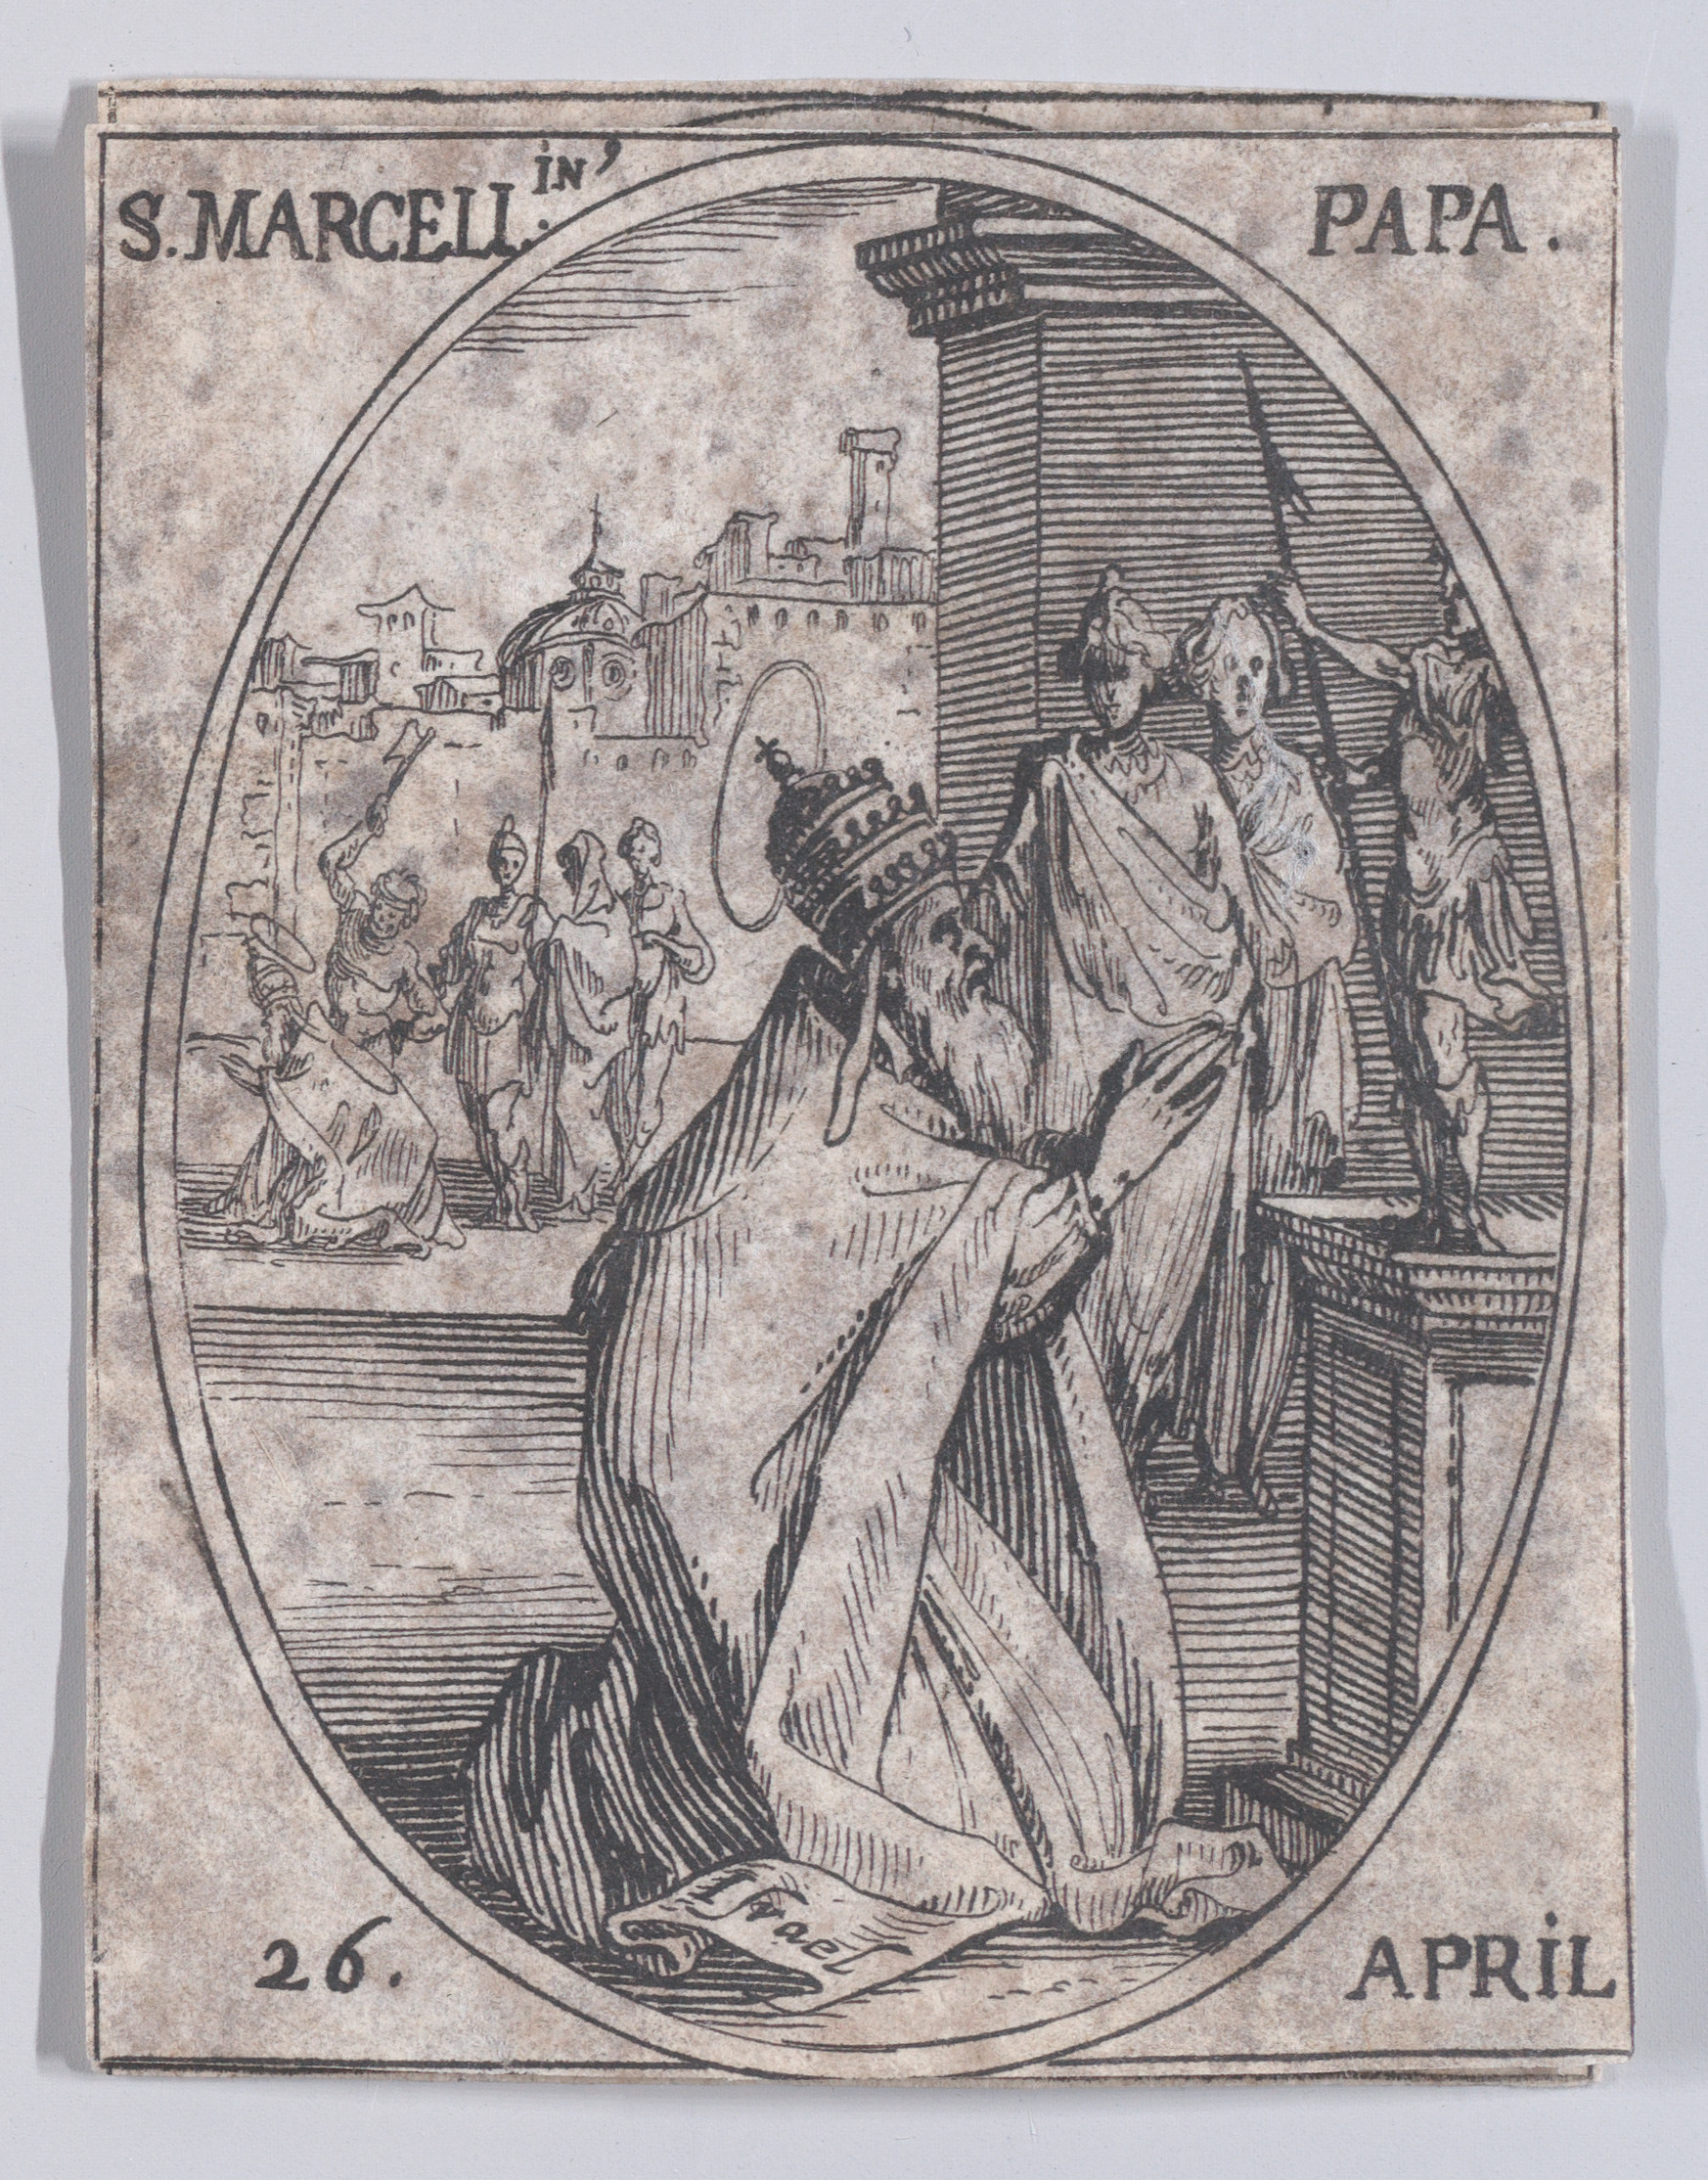 S. Marcellin, pape (St. Marcellinus, Pope), April 26th, from Les Images De Tous Les Saincts et Saintes de L'Année (Images of All of the Saints and Religious Events of the Year), Jacques Callot (French, Nancy 1592–1635 Nancy), Etching; second state of two (Lieure)